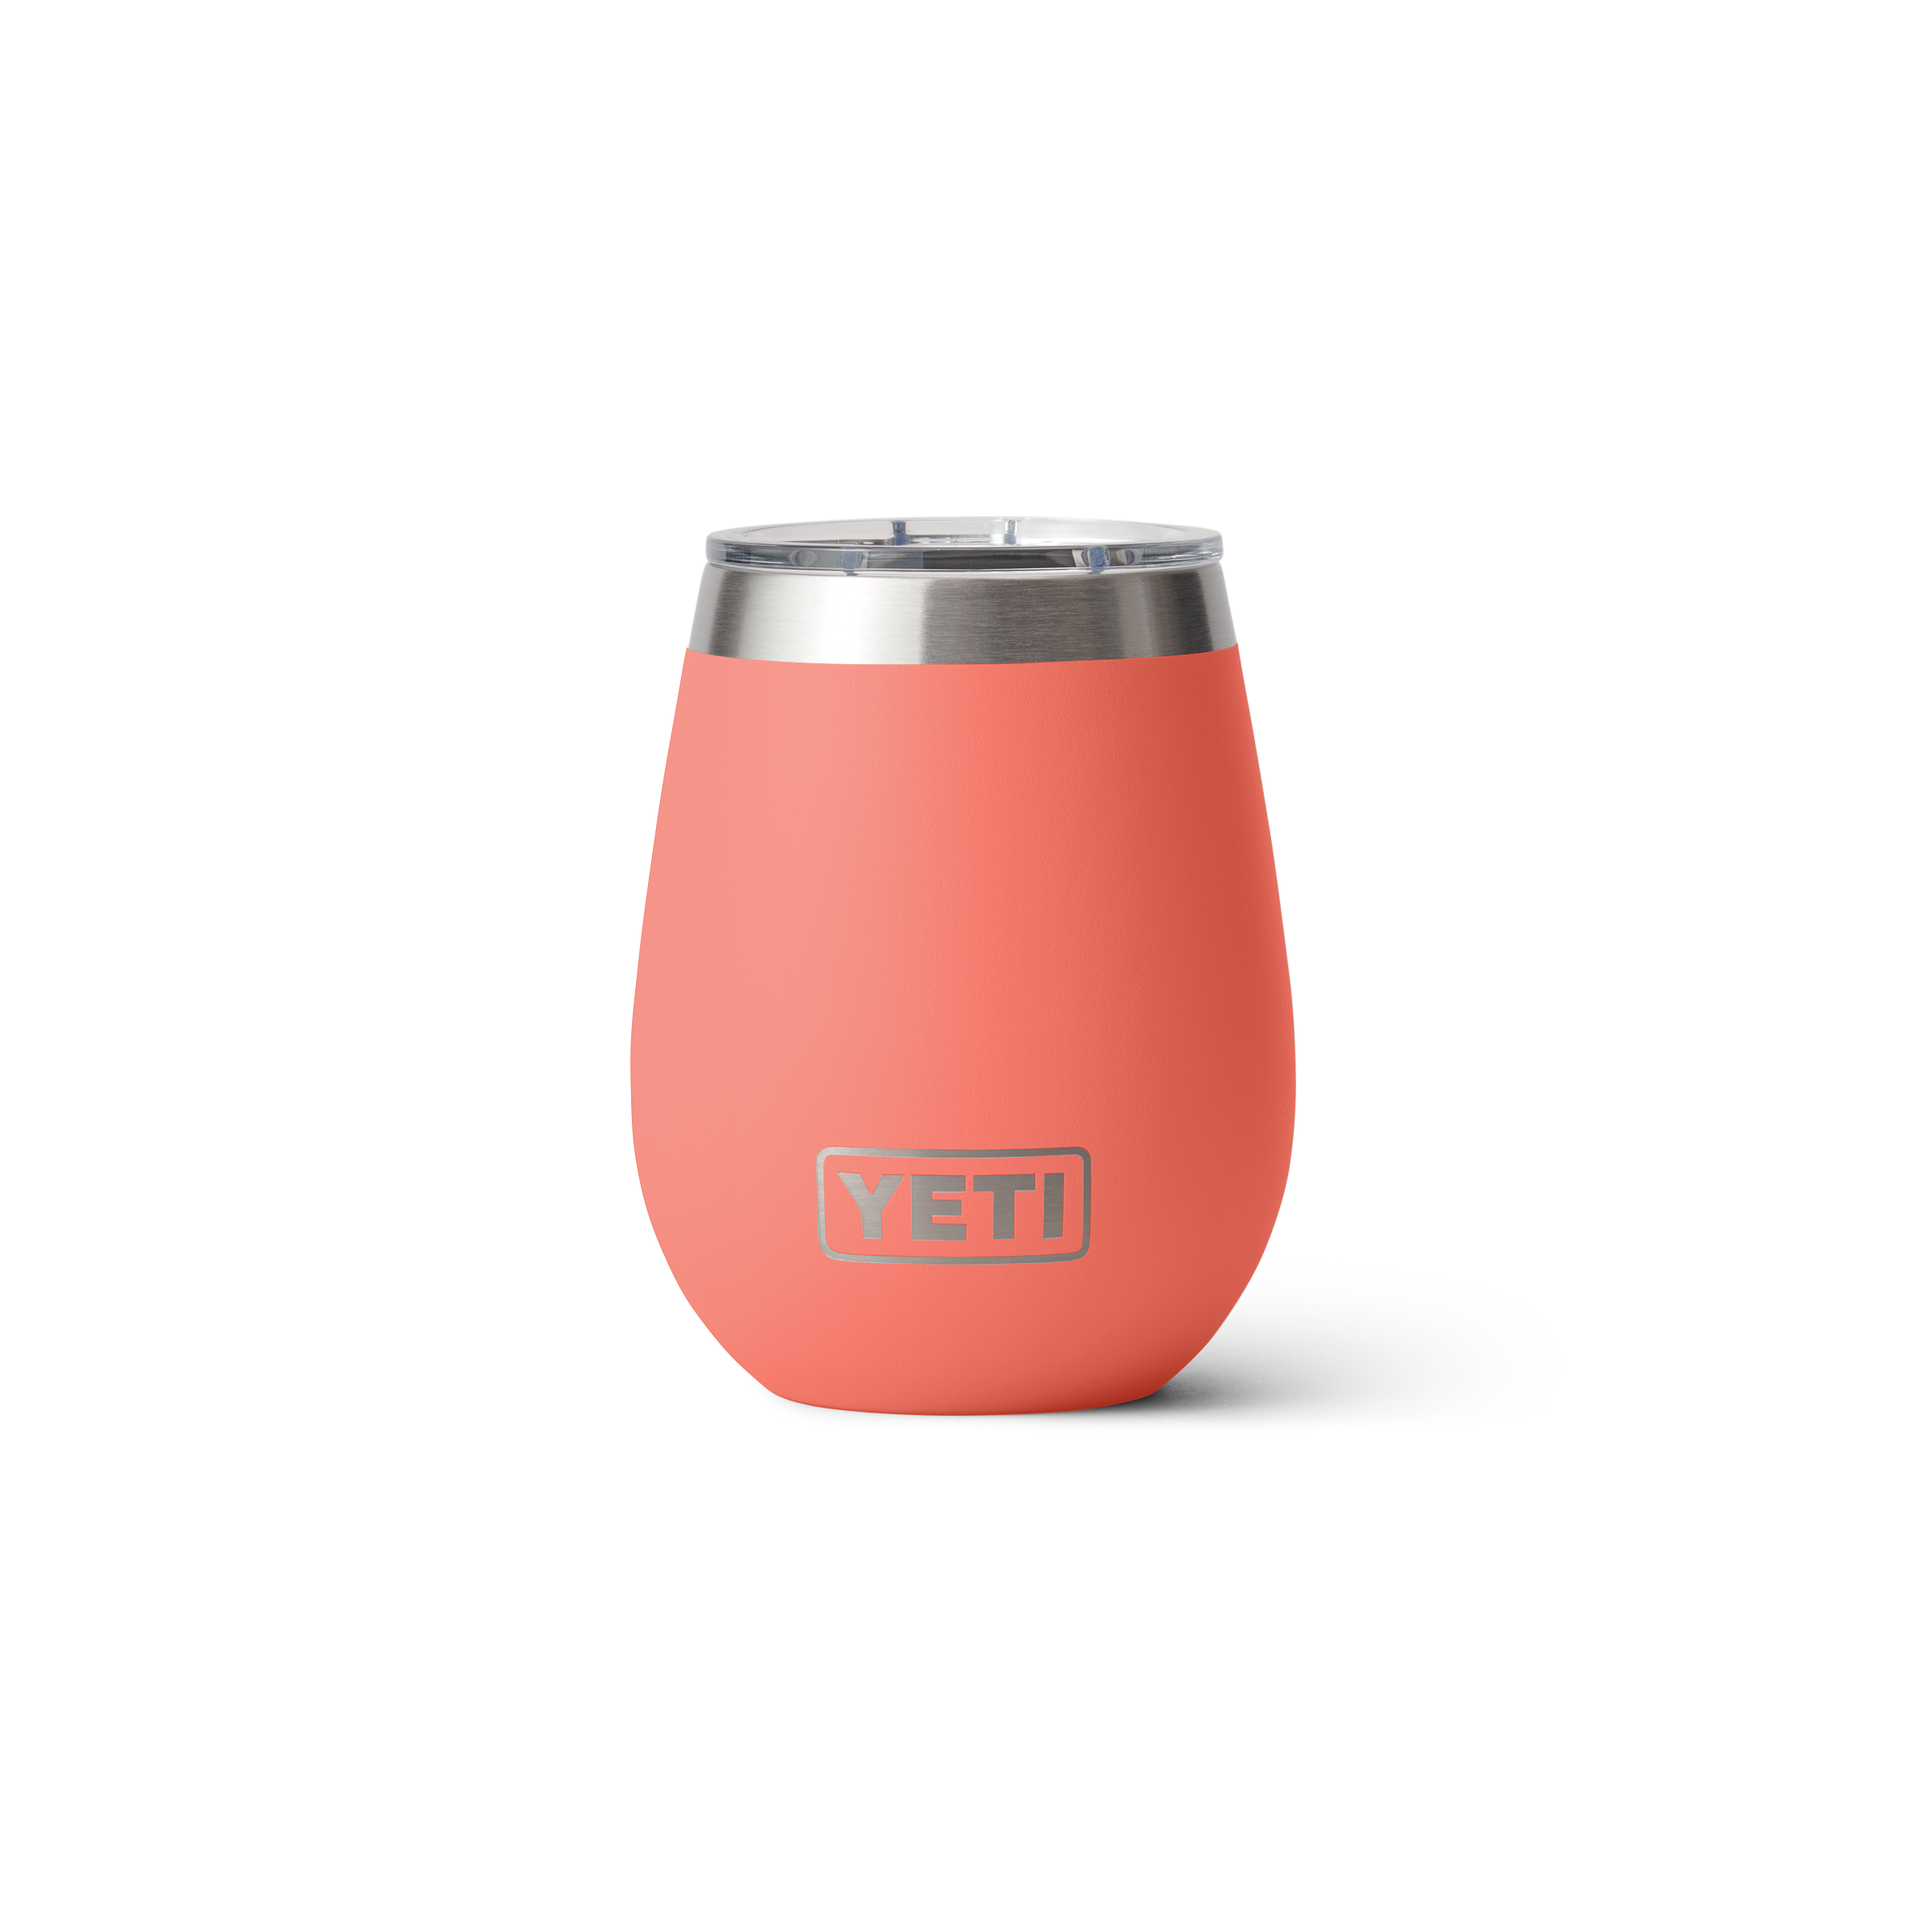 YETI Sandstone Pink Collection  Color Inspired by True Events 